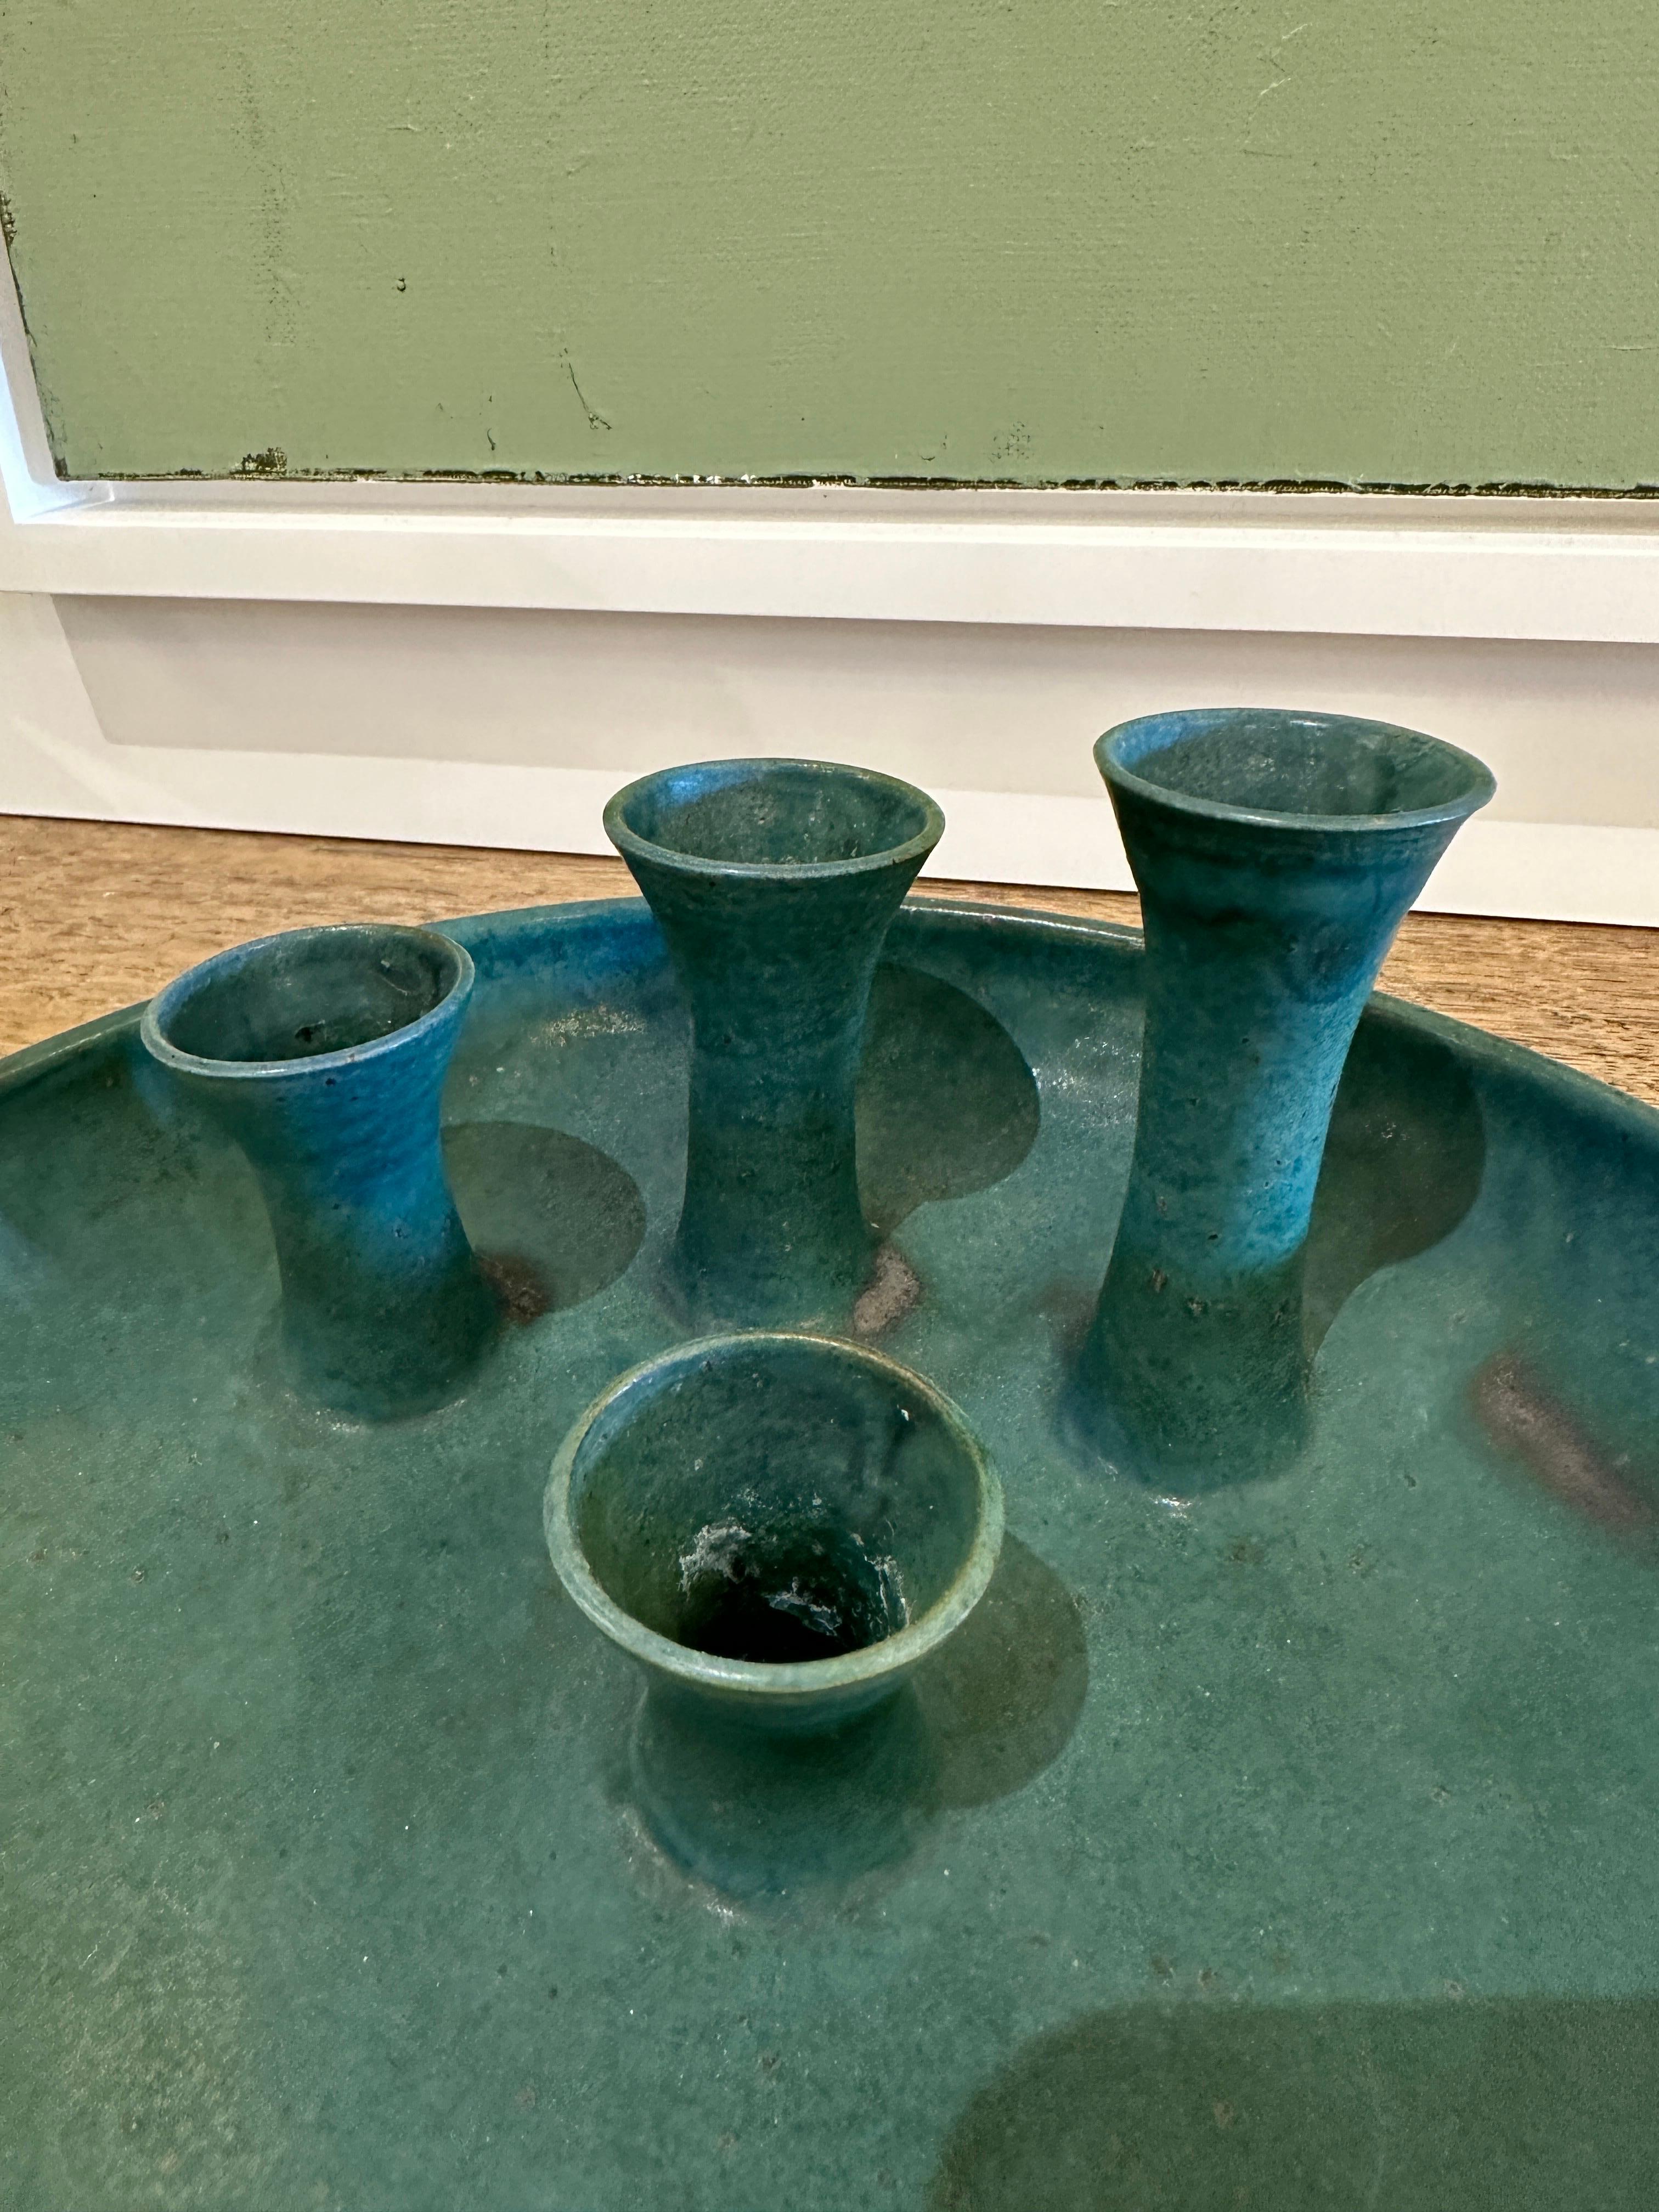 This lovely West German pottery bowl and bud vase features 4 varying sizes flower bud holders. The green matte finish has natural variations in coloring throughout. Wonderful vintage pottery from the West German school.  THIS ITEM IS LOCATED AND